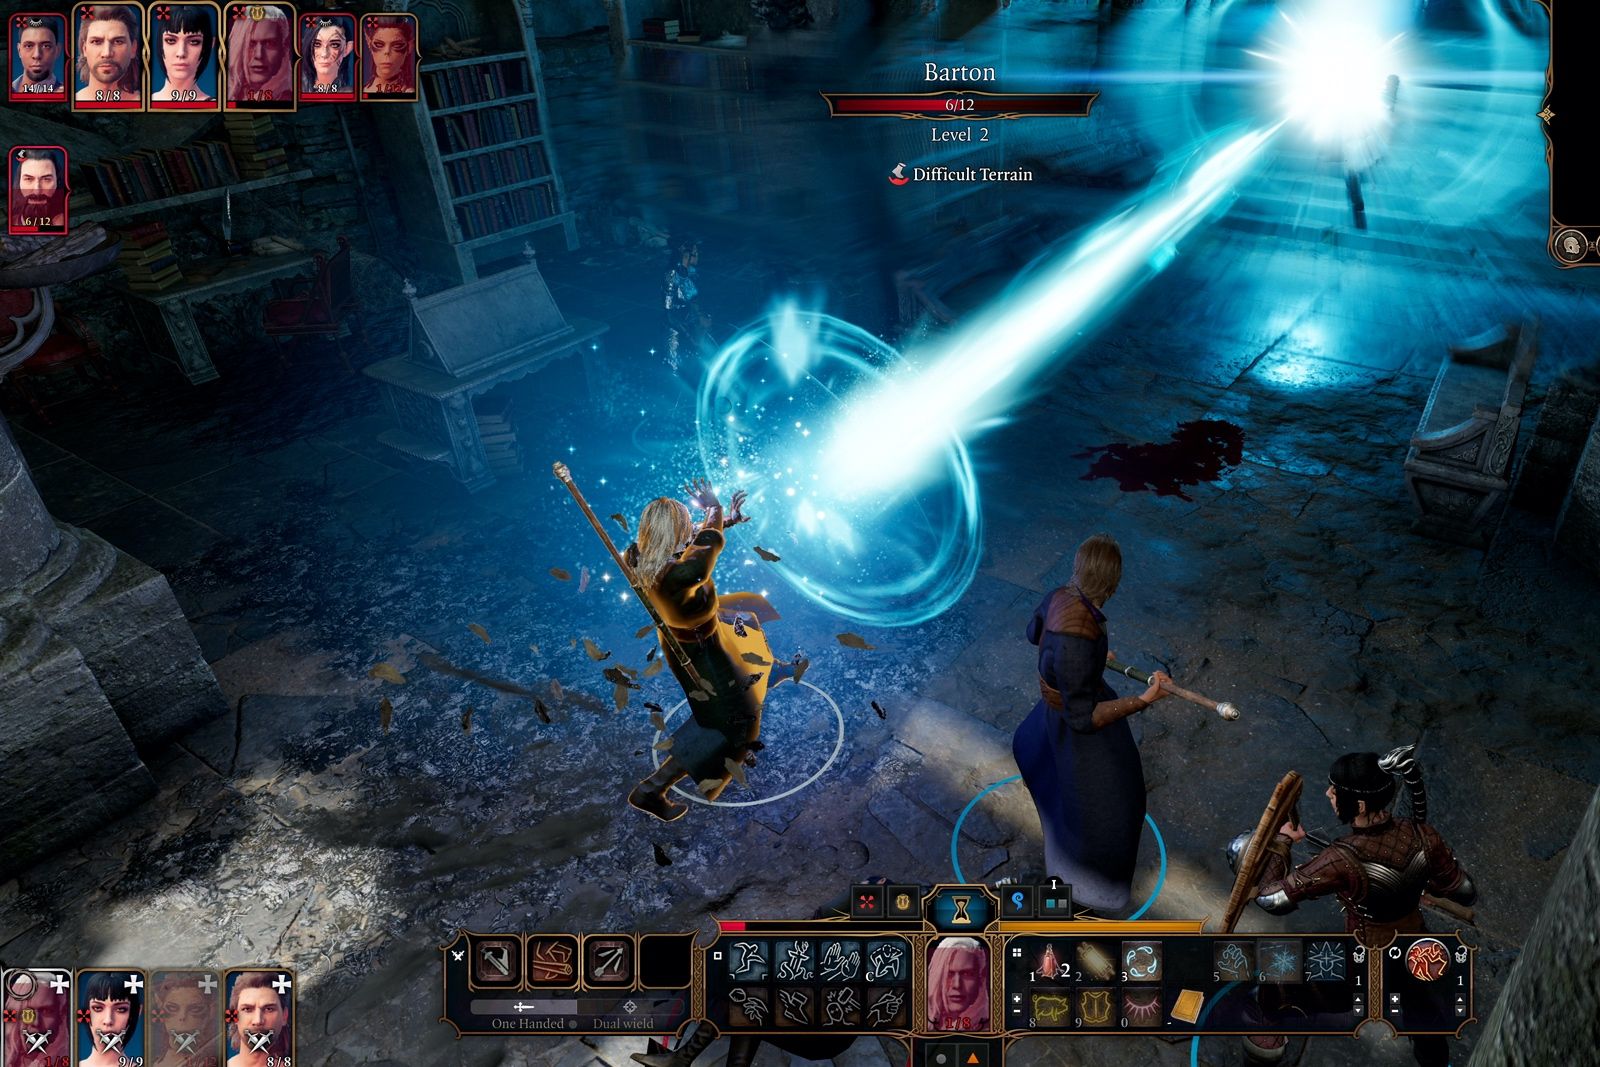 Baldur's Gate 3 review-in-progress: Another sprawling epic? photo 5